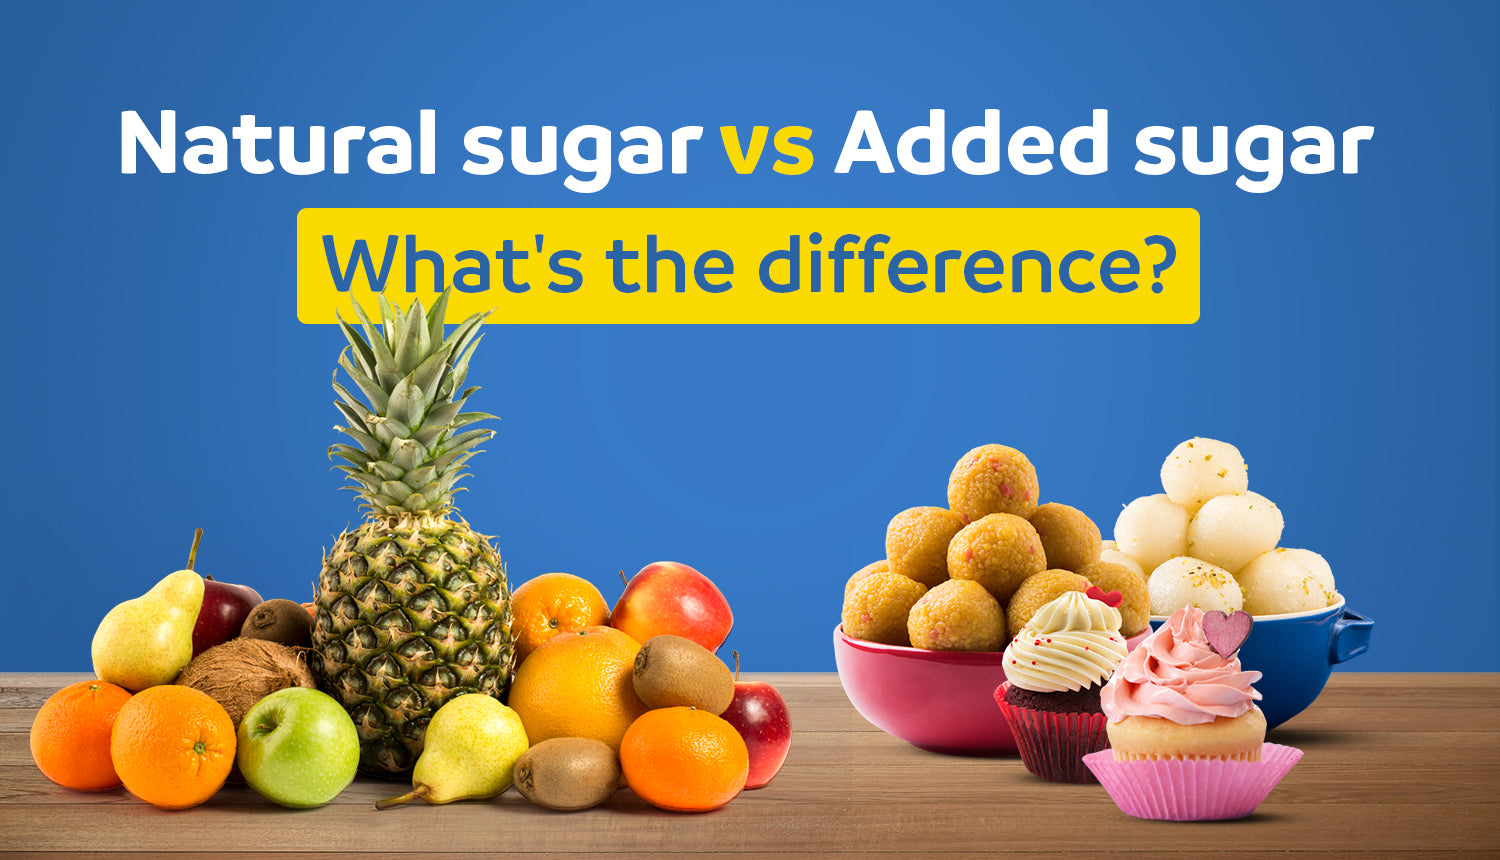 natural sugar vs added sugar: what is the difference?